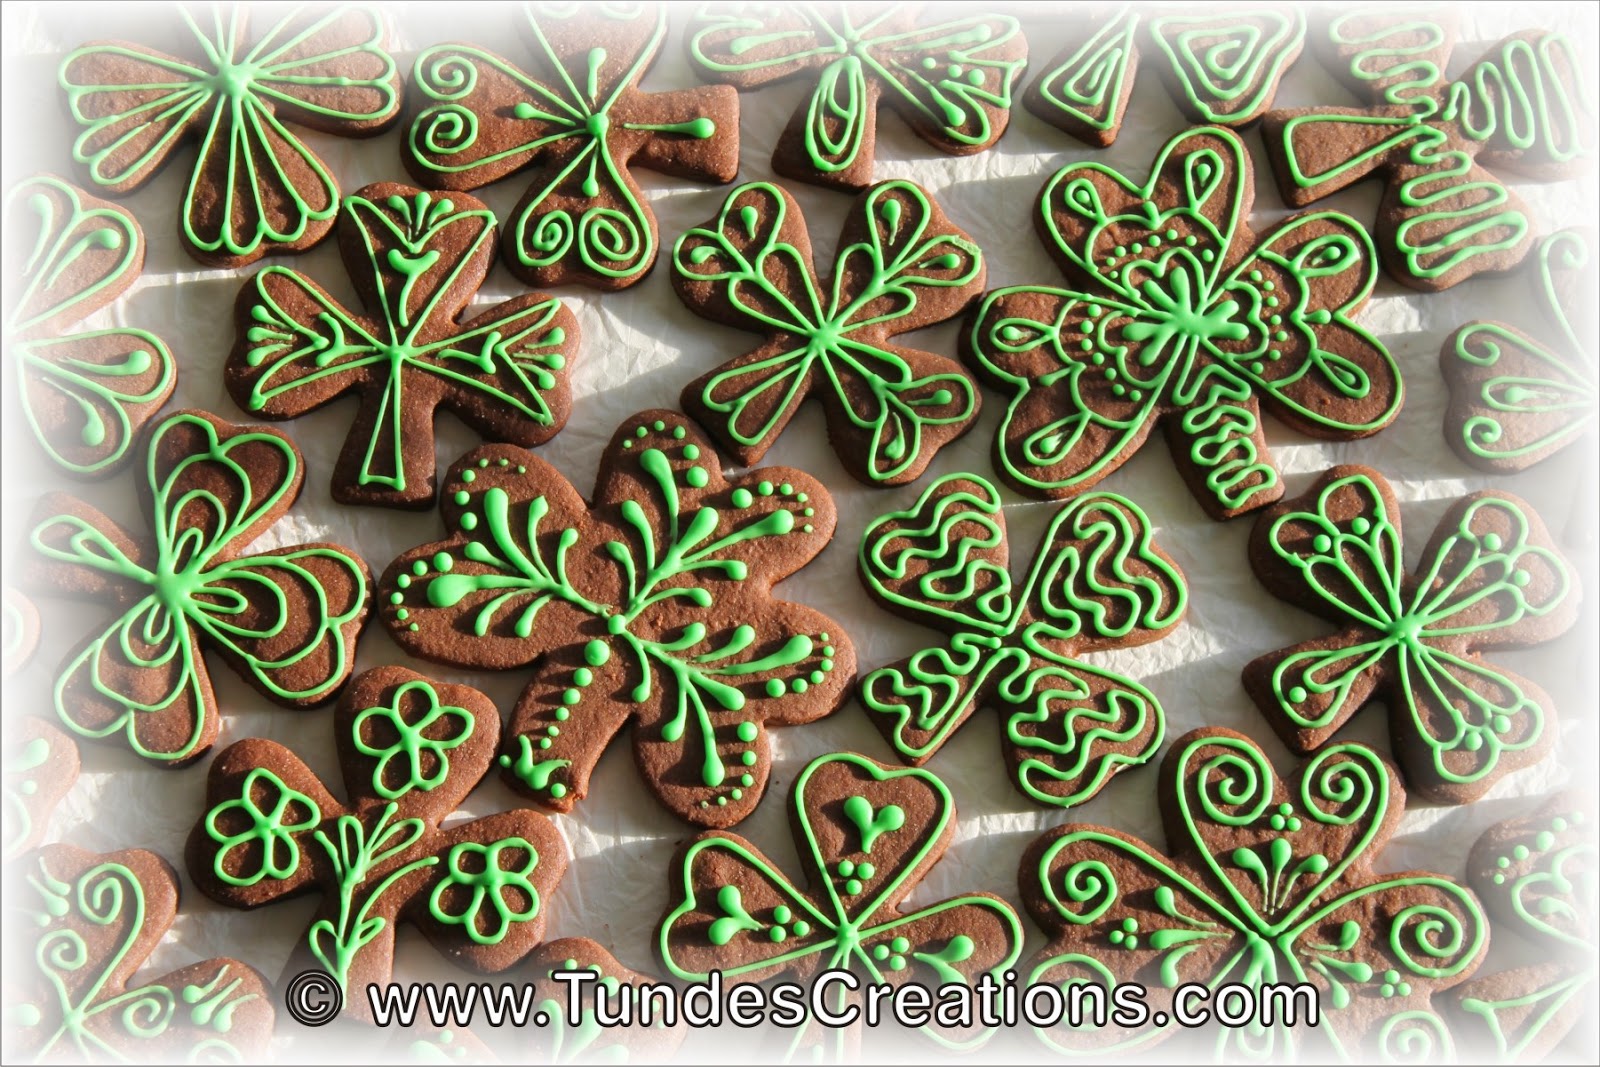 St. Patrick's Day chocolate cookies